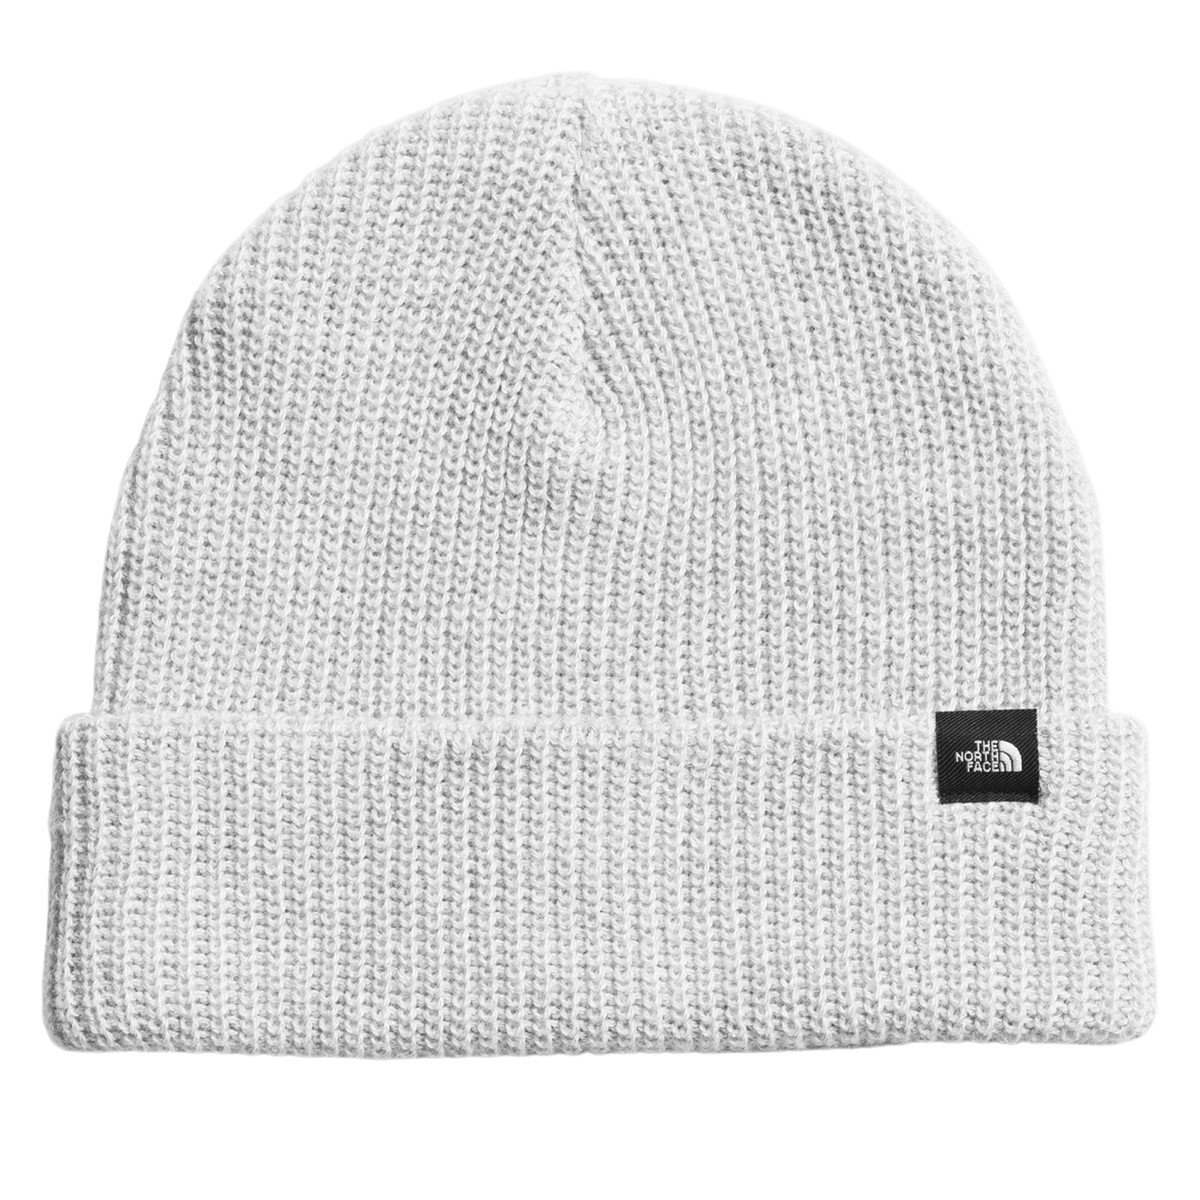 Tuque Urban Switch grise